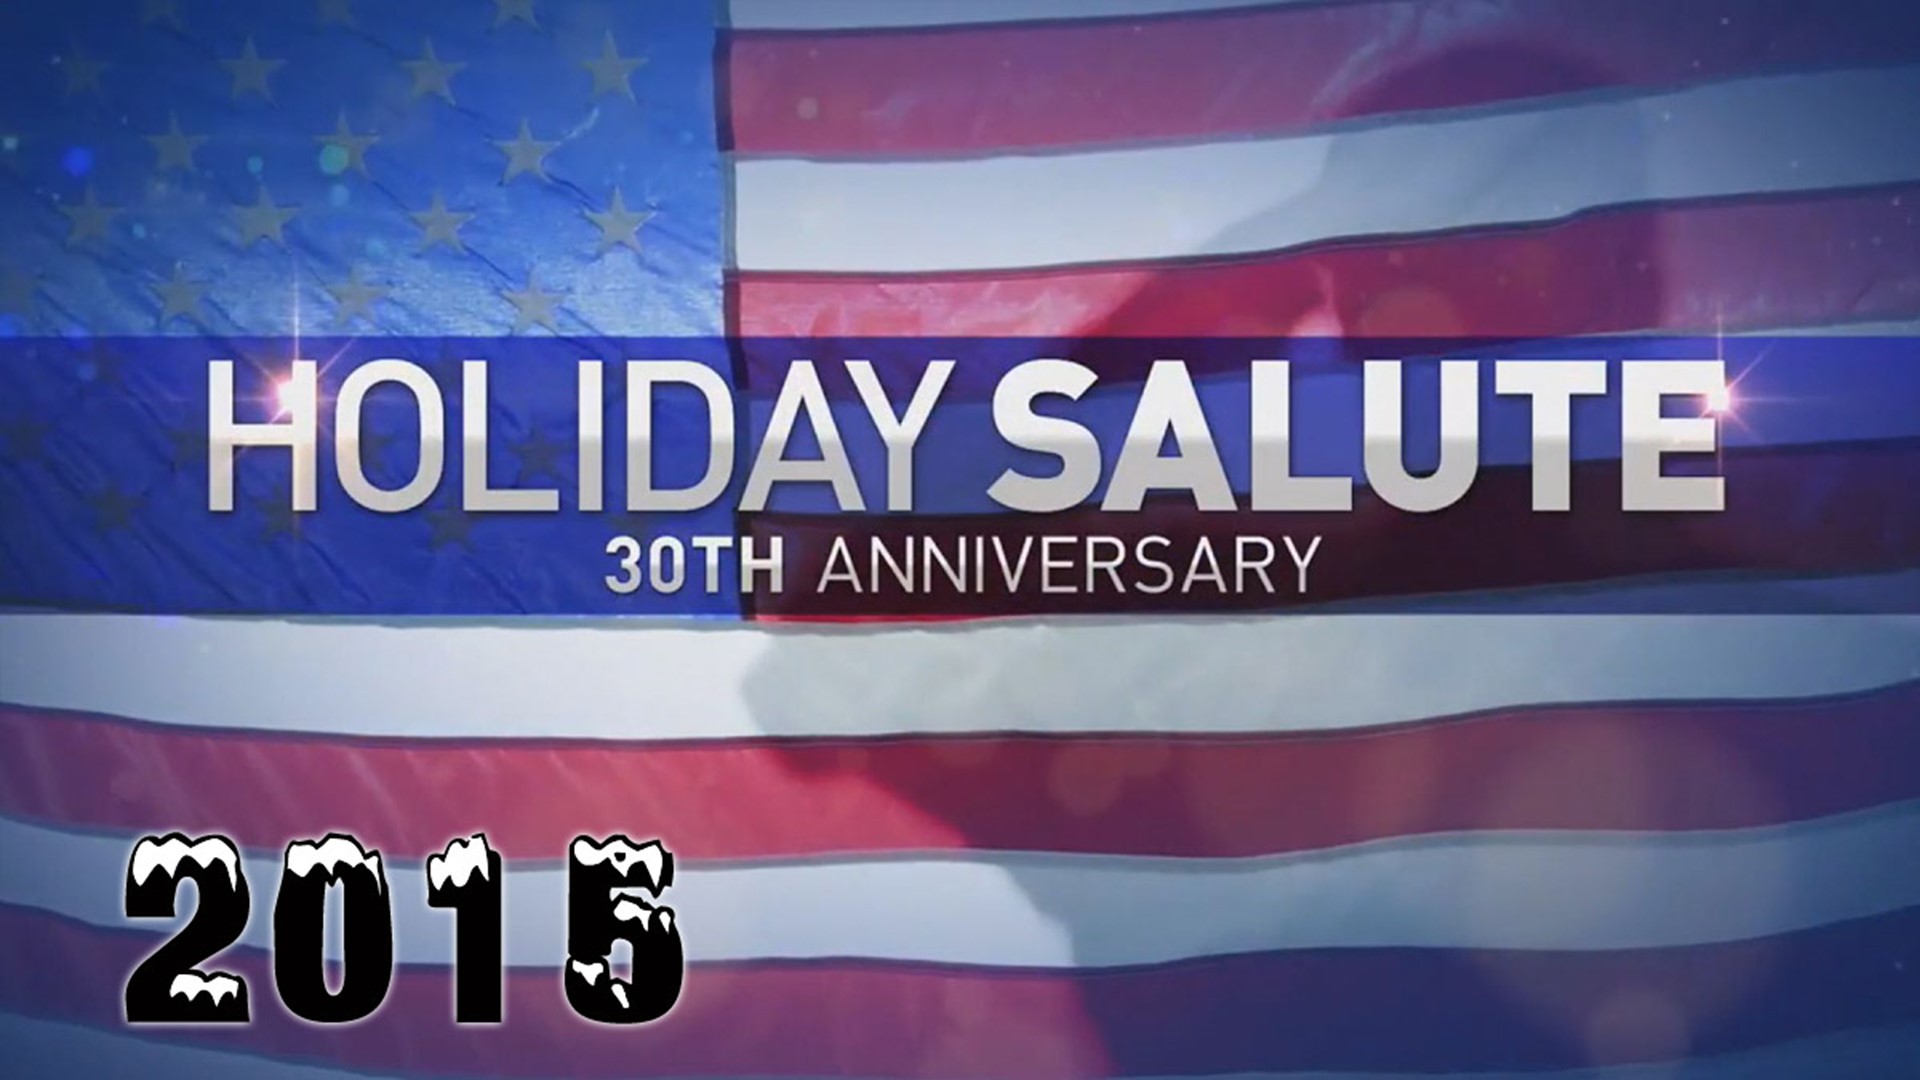 For more than 35 years, 13News Now has honored our military men & women with an annual holiday special. This is the 30th annual Holiday Salute, which aired in 2015.